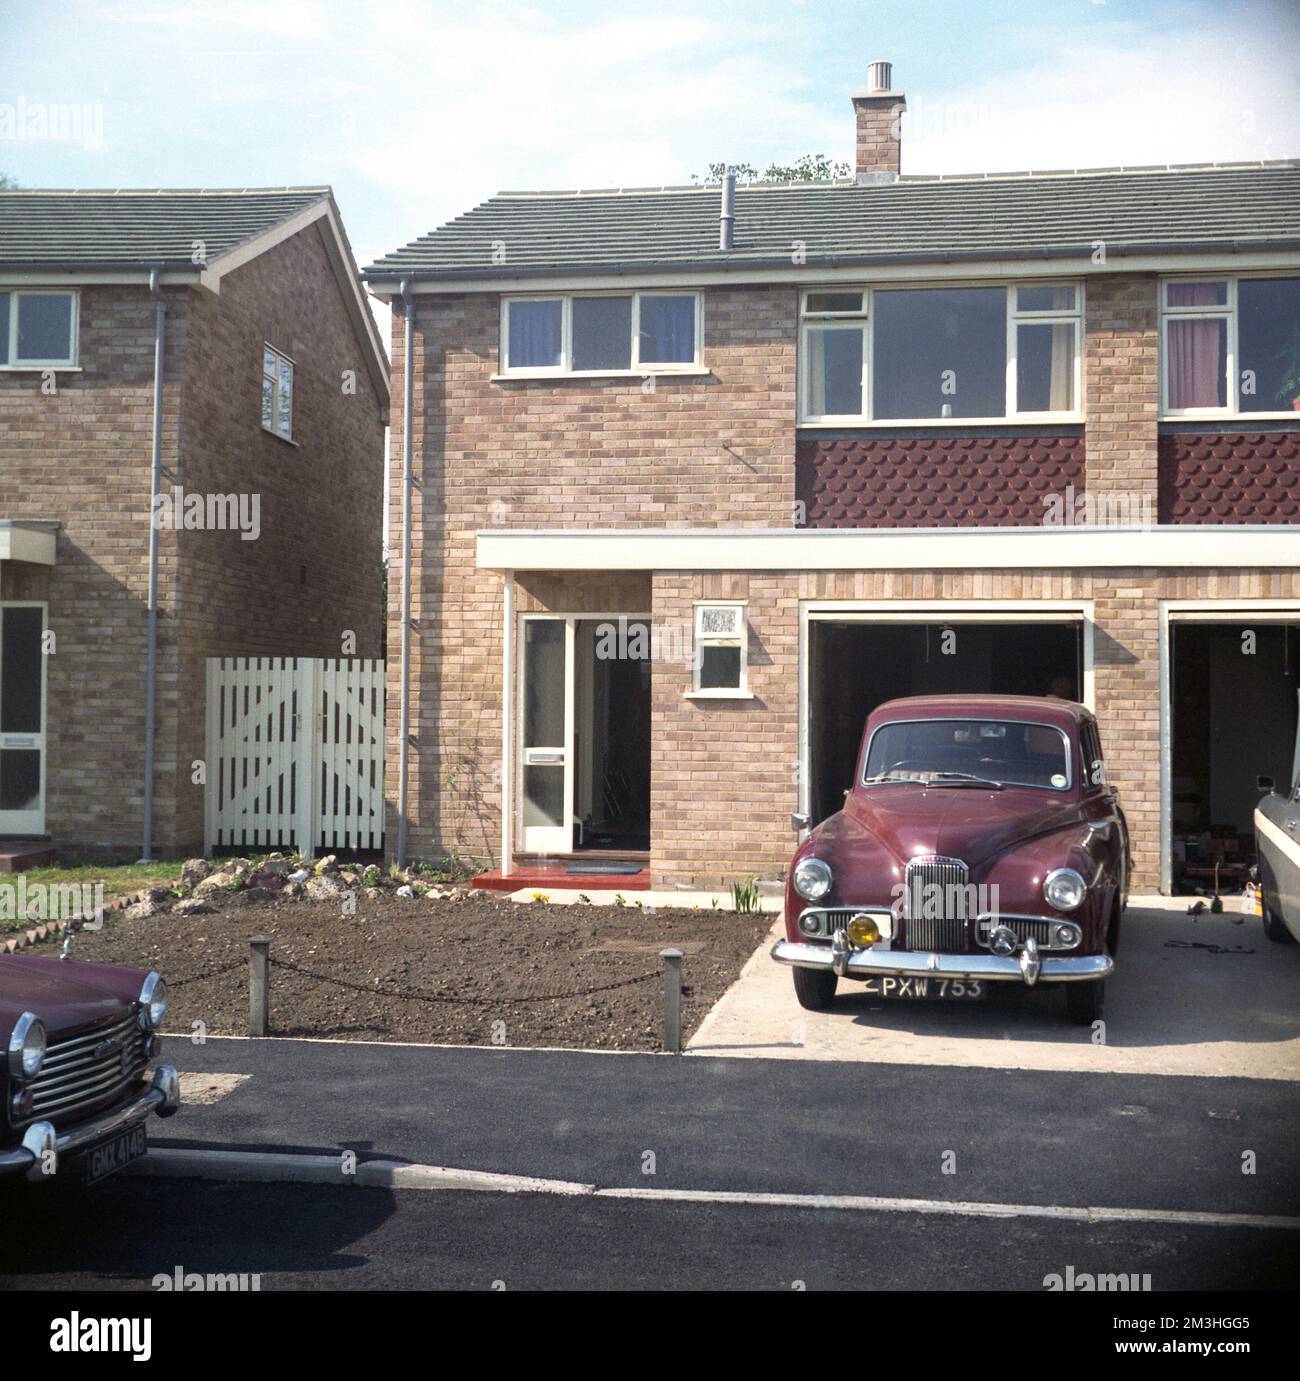 cira late 1960s, historical, a post-war maroon coloured Humber Hawk car parked in the driveway of a new semi-detached house, with an internal garage, built in the modern style of the era, as seen on many housing estates in Britain at this time. The Humber Hawk was a car built in Britiain by Humber Limited, between 1945 and 1967, with a number of different styles and variations. The car seen here is most likley the Humber Hawk Mark VI which was introduced in 1954 an upgraded version of the post-war 1948 Hawk, a completely newly designed car than the first and original 1945 Hawk. Stock Photo